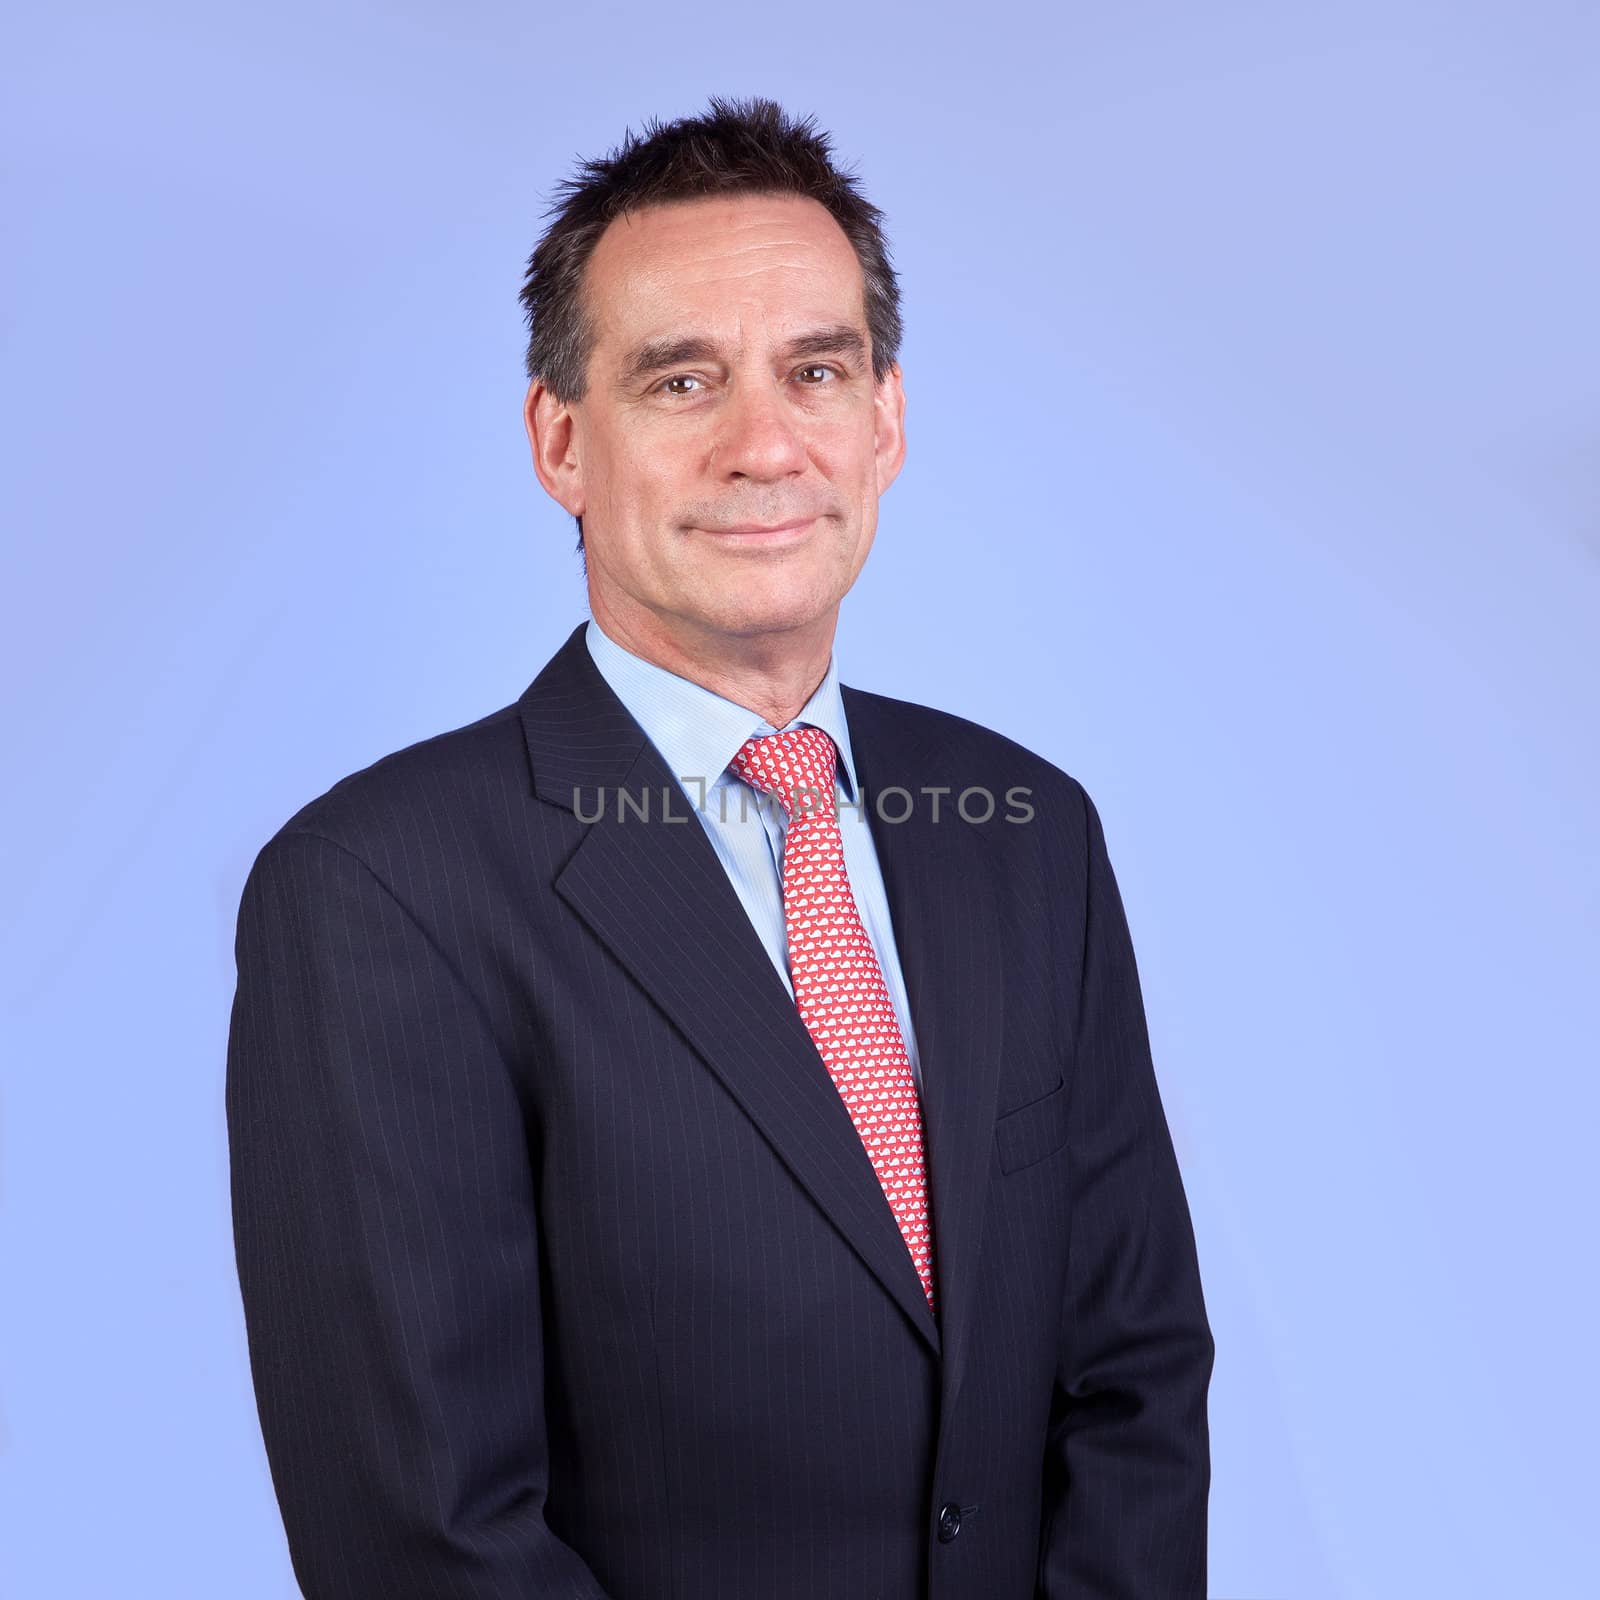 Attractive Smiling Business Man in Suit on Blue Background